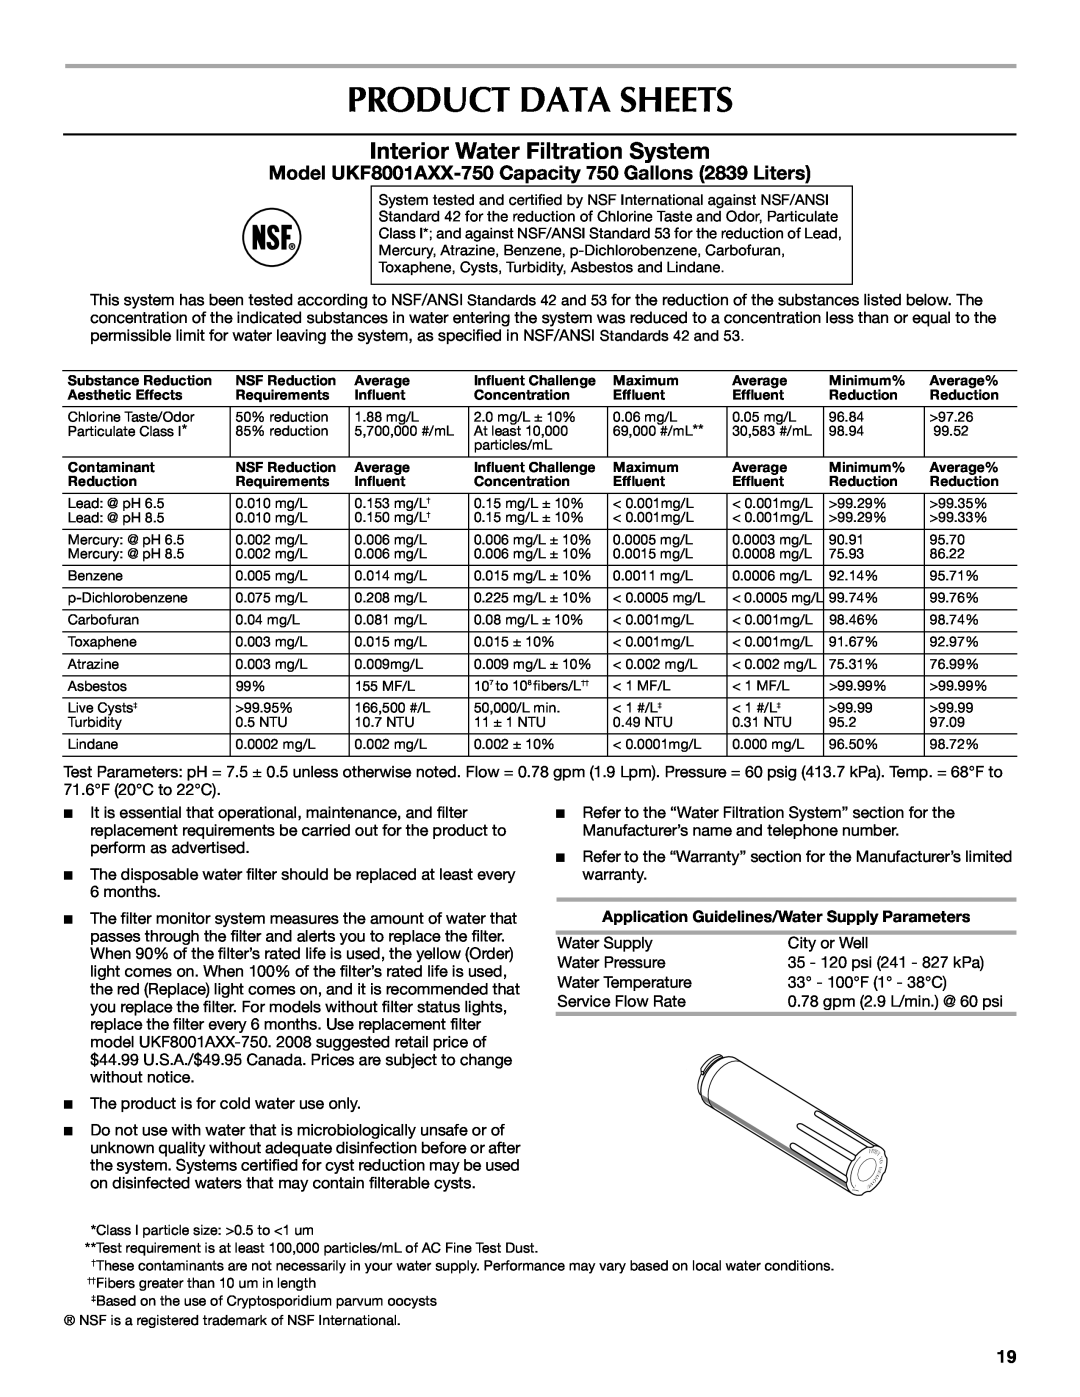 Maytag MFD2562VEW installation instructions Product Data Sheets, Interior Water Filtration System 